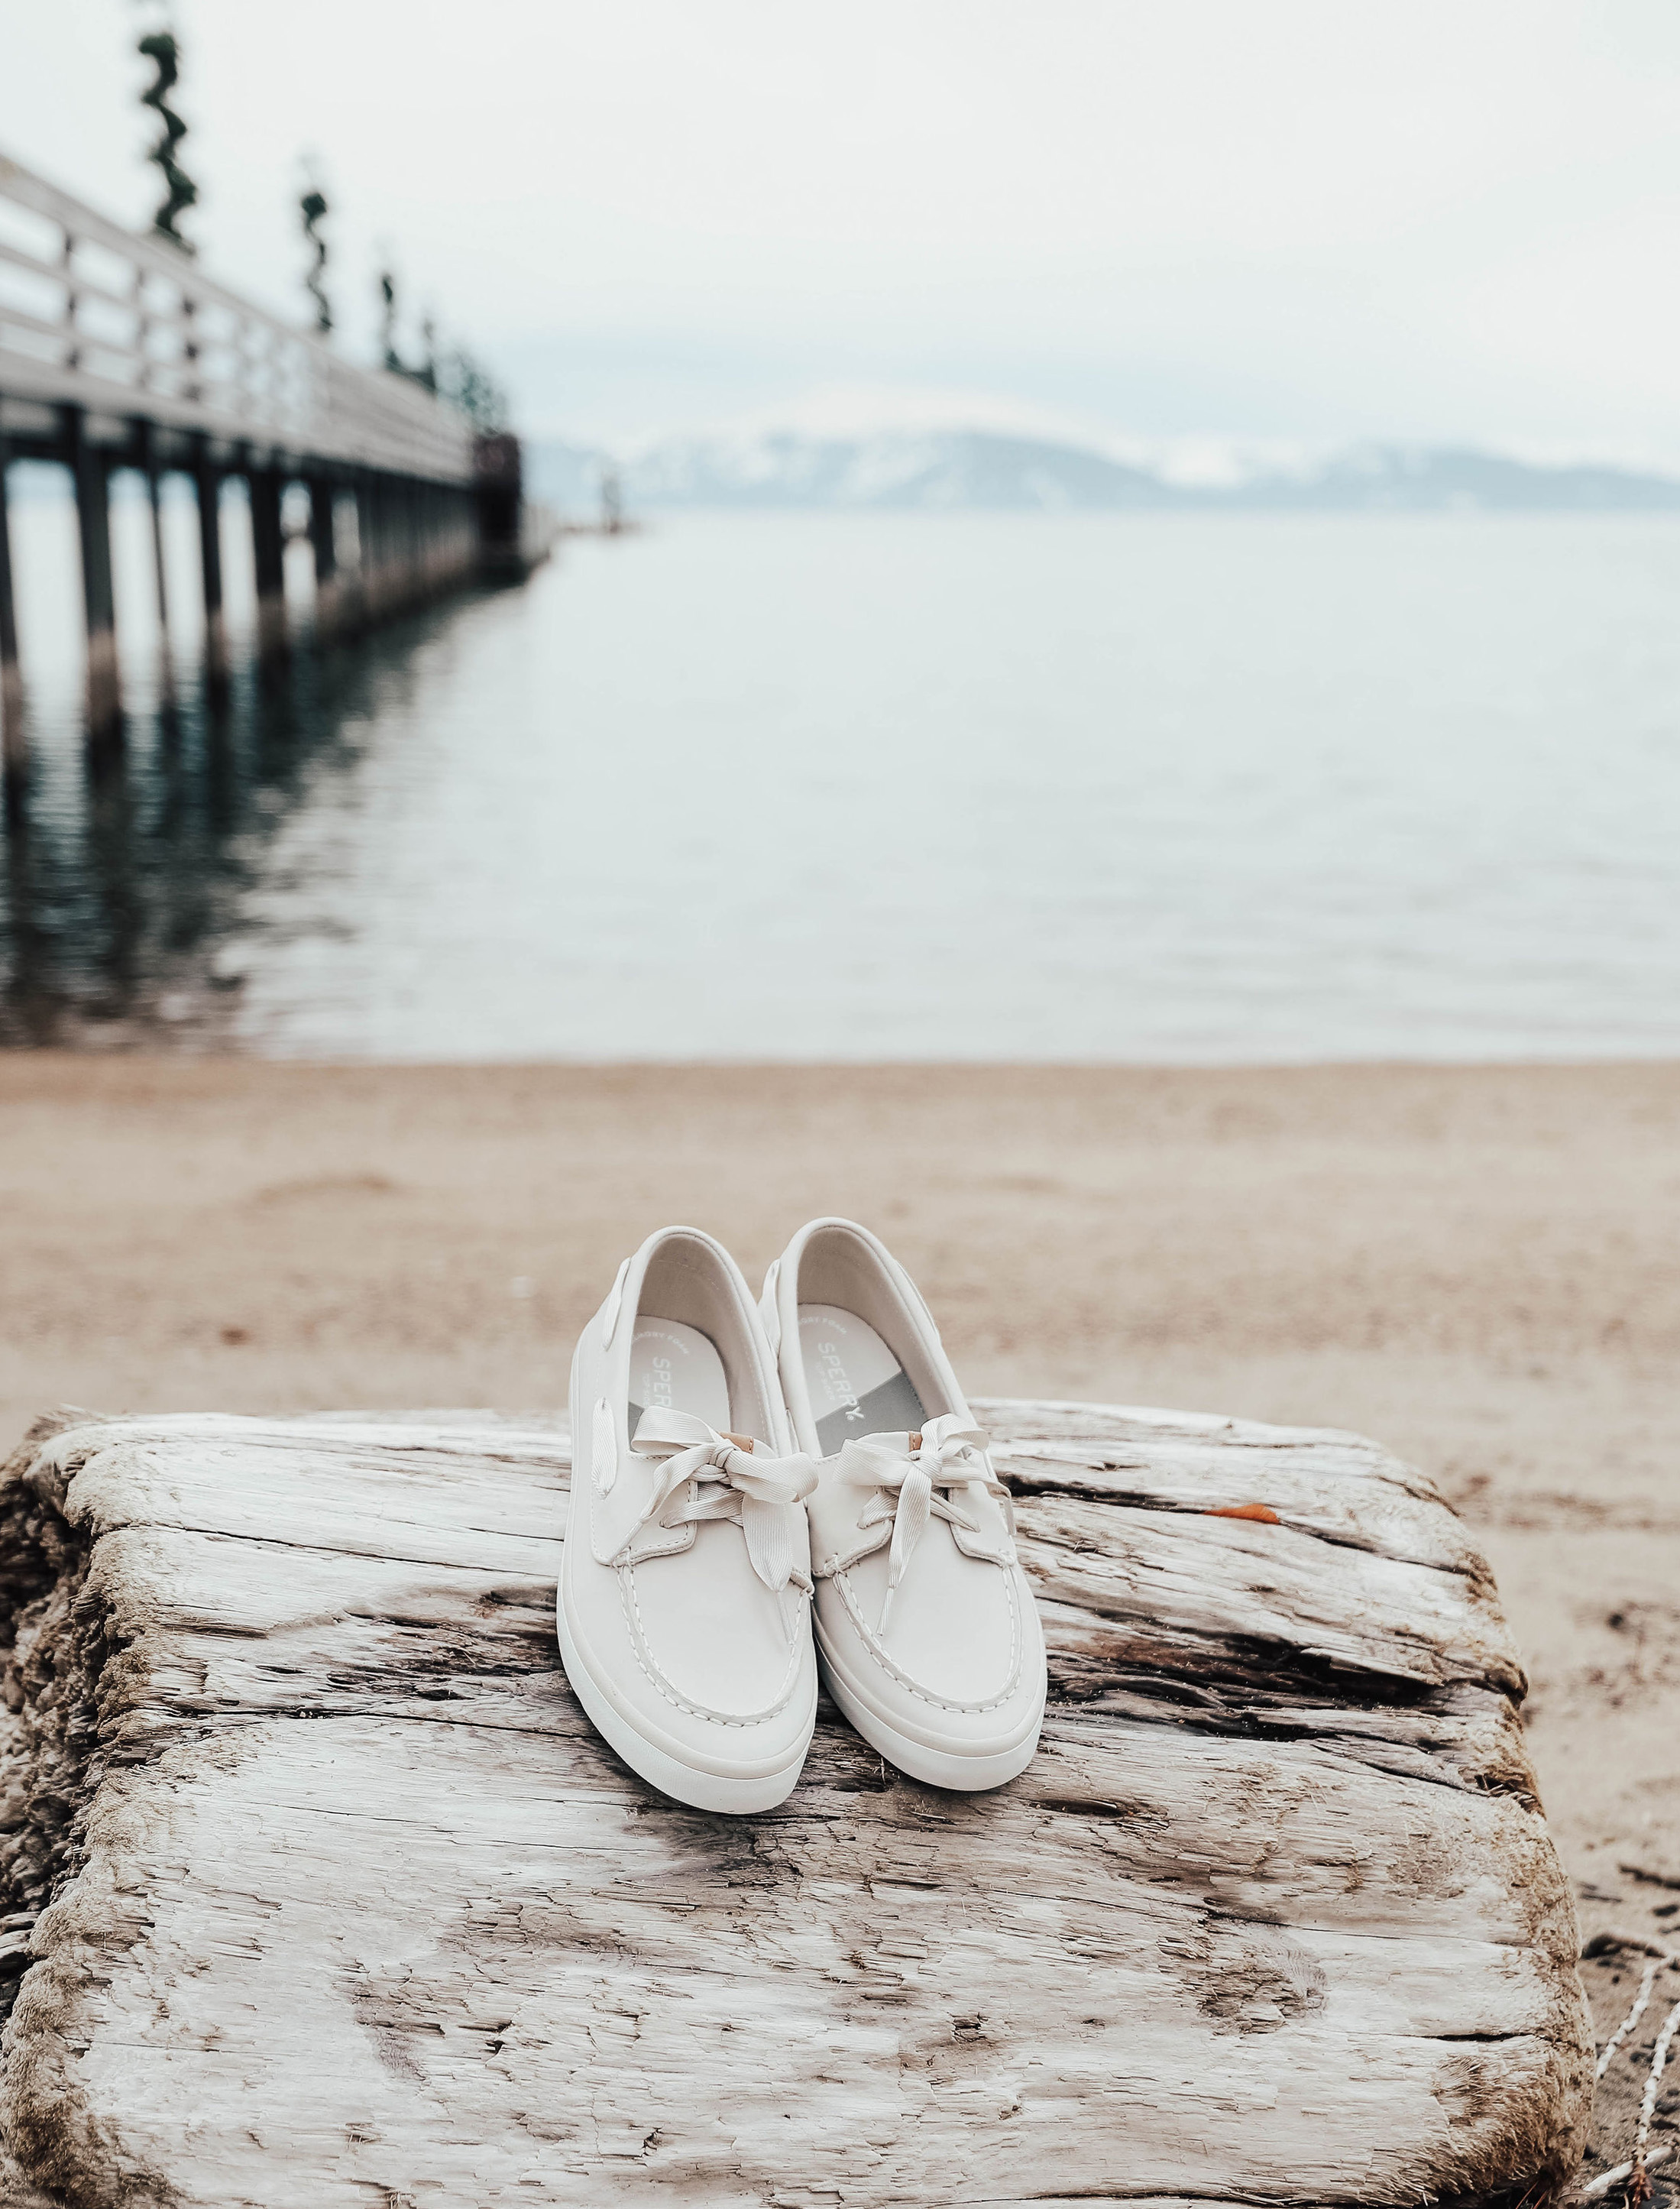 Reno Nevada Blogger, Emily Farren Wieczorek spends an afternoon at Glenbrook, Lake Tahoe wearing The Sperry Sailor Boat Shoe - a new take on a timeless classic